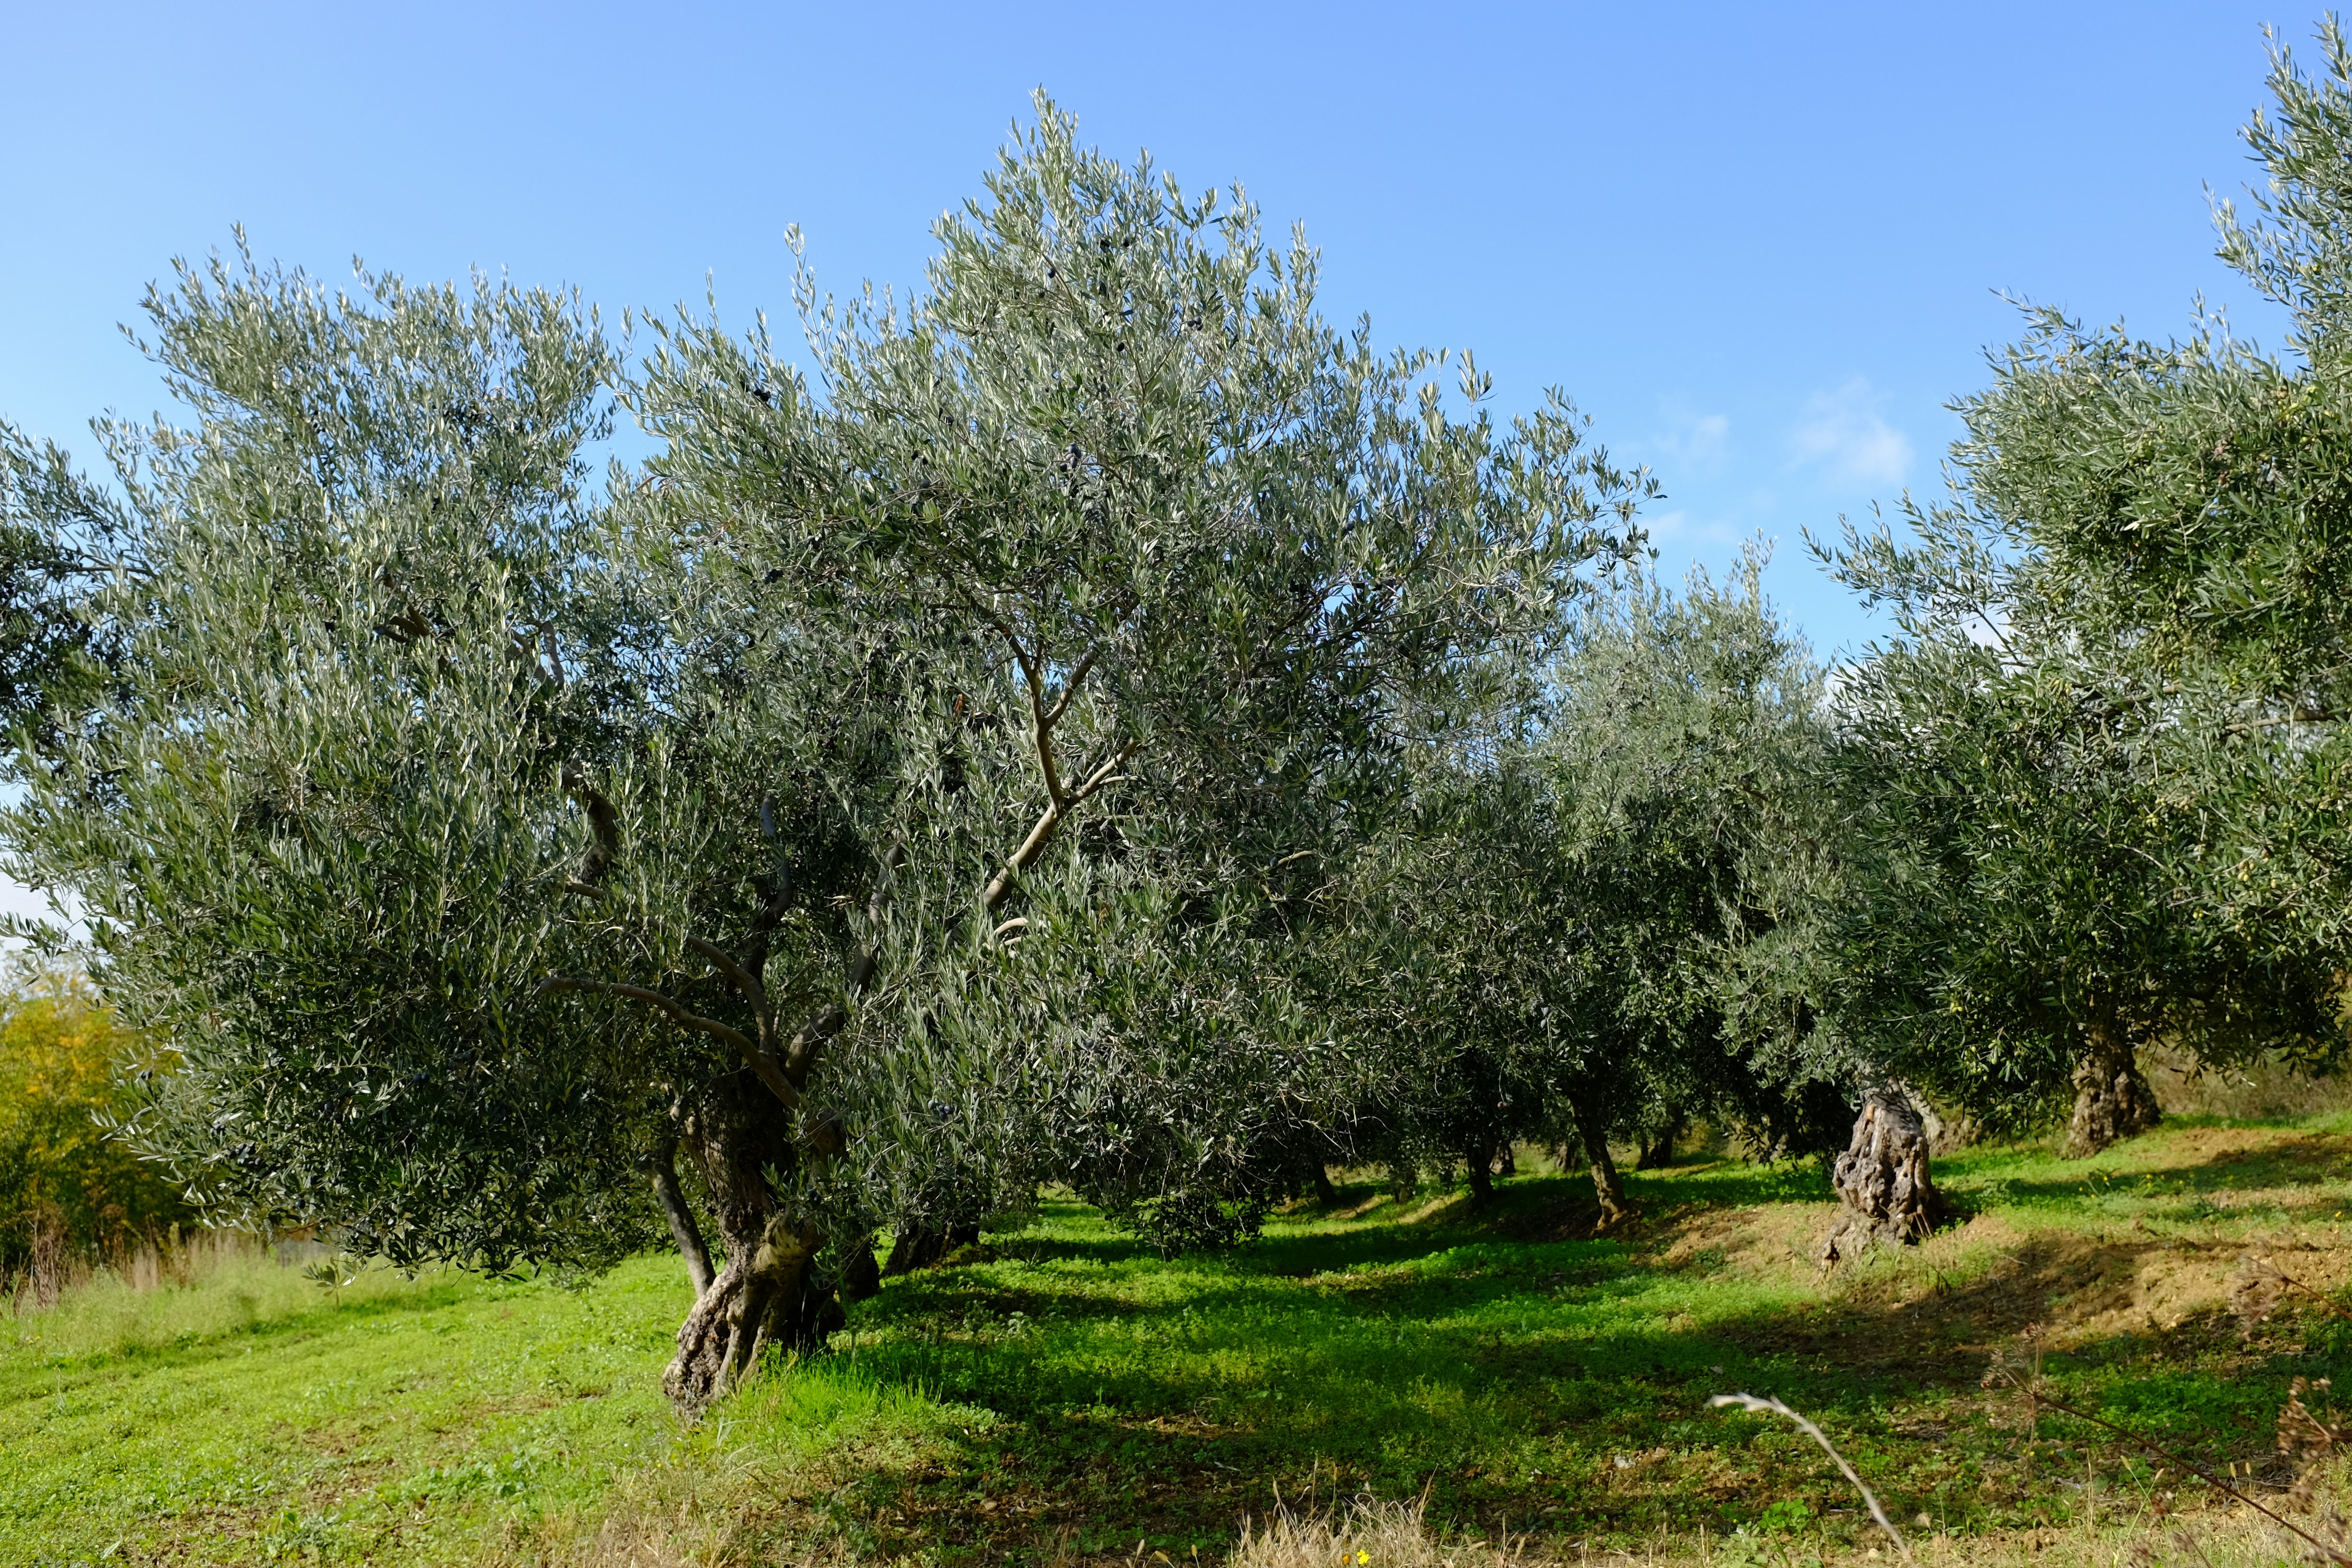 Old olive trees are a silvery green over thick, gnarled trunks in a field of bright green grass on the Istrian Peninsula in Croatia's Mirna river valley